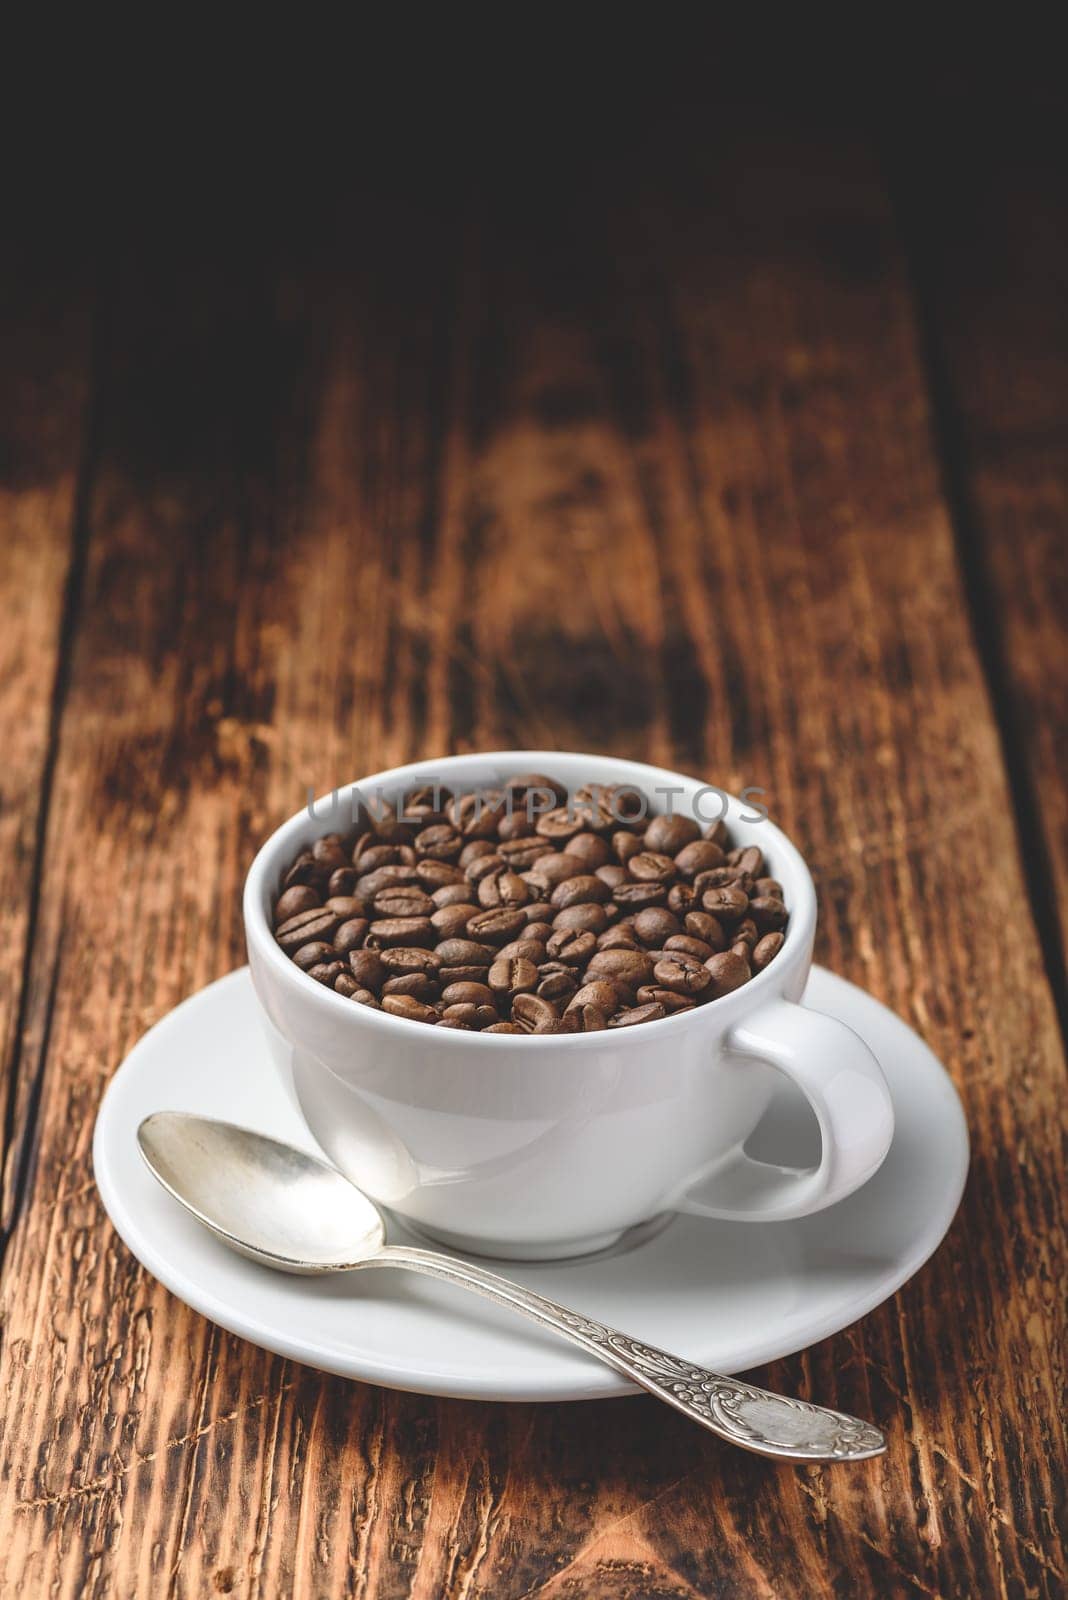 Roasted coffee beans in white cup over rustic wooden surface